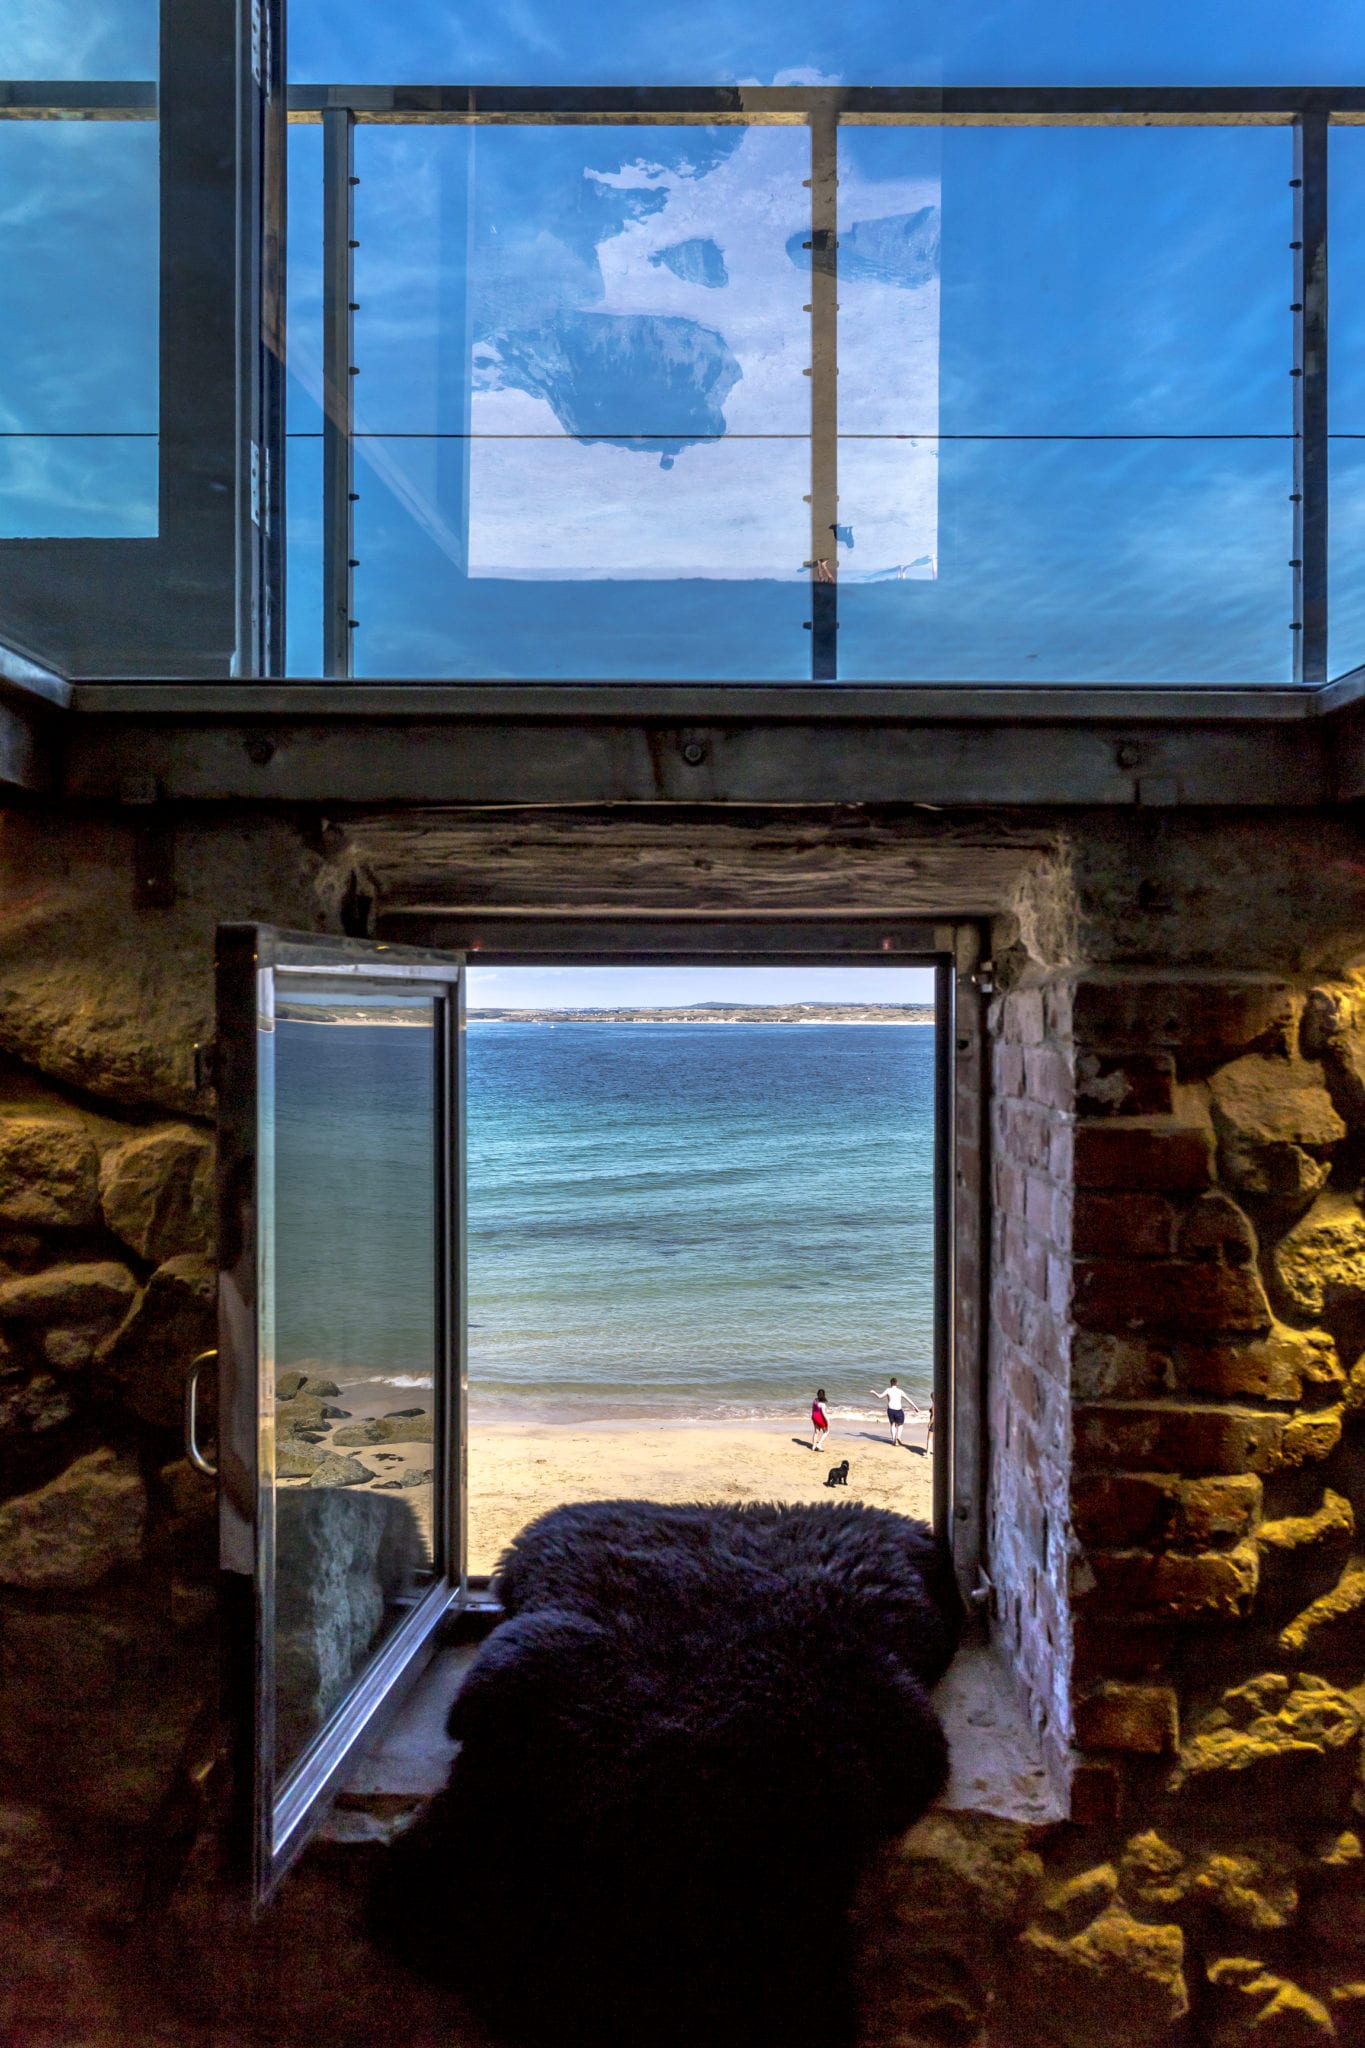 A small window built into a stone wall revealing a beach and a seafront views